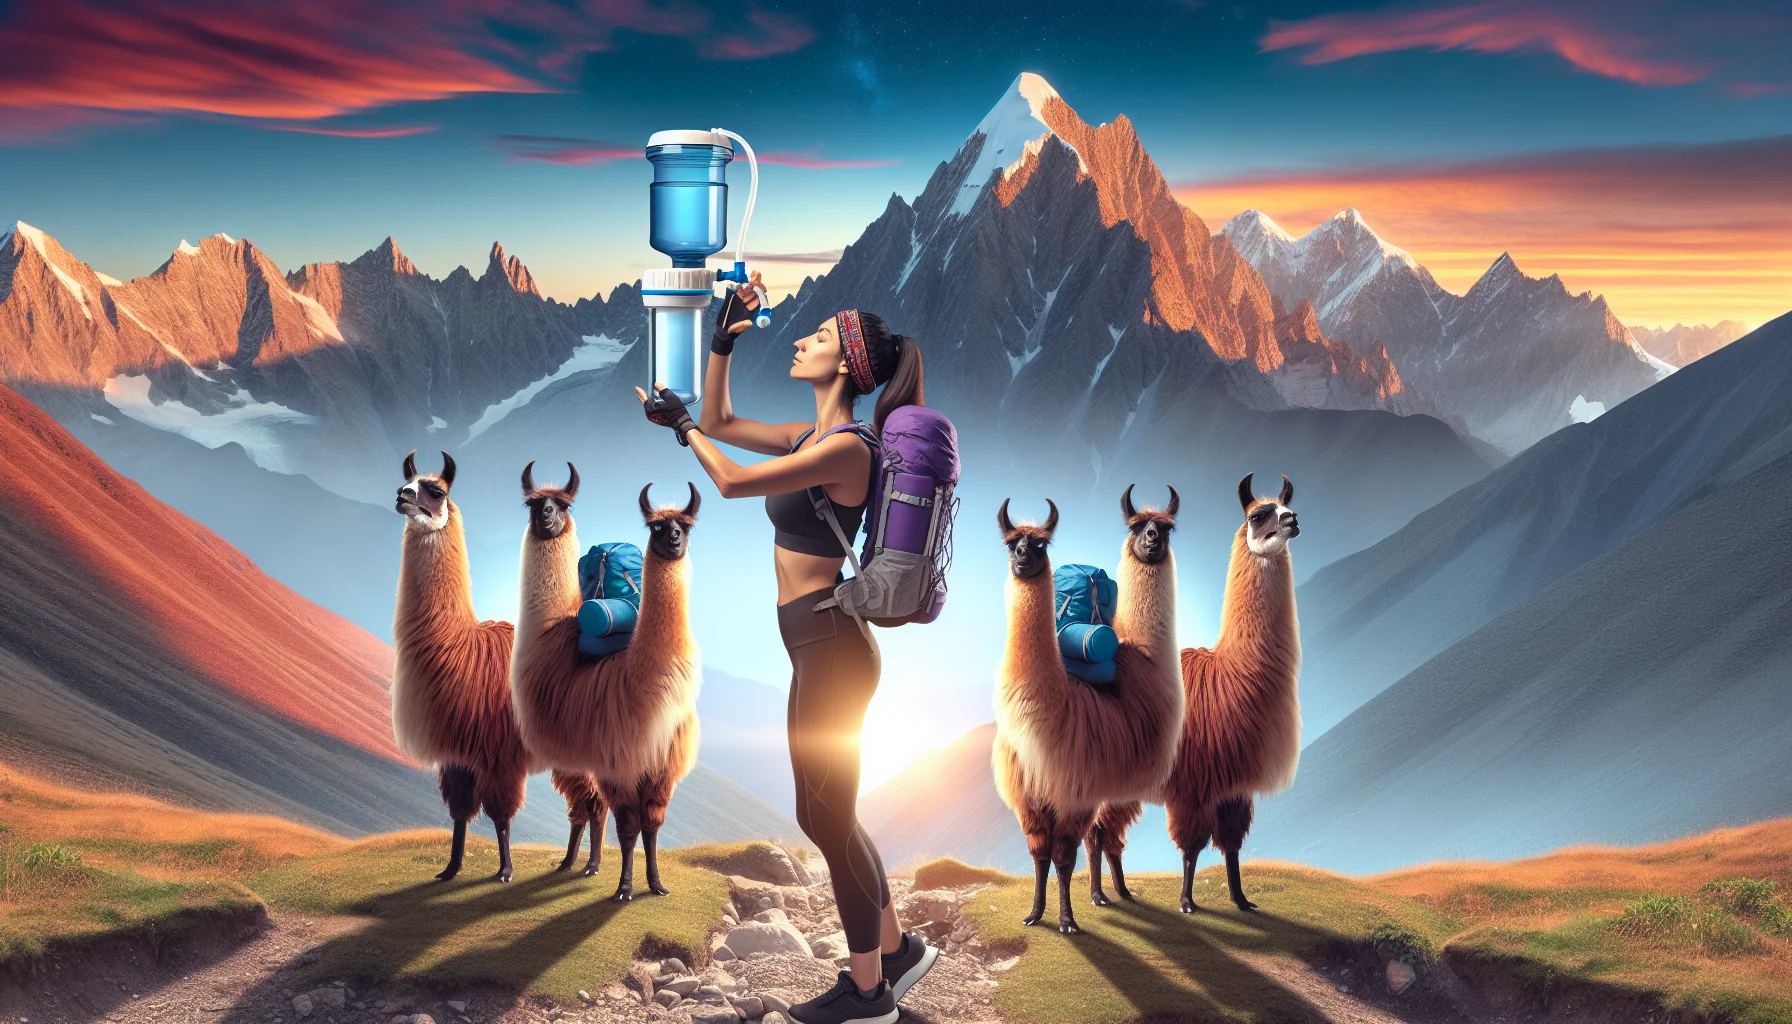 Generate a creative and humorous scene illustrating the usage of a portable water filter, seen as an essential gear for adventurous fitness enthusiasts. The scene can include an athletic Middle Eastern woman using her portable water filter in an exaggerated, high altitude mountain scenario while exercising. A quirky touch could be a group of backpack-toting llamas looking curiously at her efforts. The llamas are also equipped with mini portable water filters around their necks, emphasizing the theme that hydration is important for everyone during physical activities. The background should display a vibrant sunset casting long shadows across majestic mountain peaks.